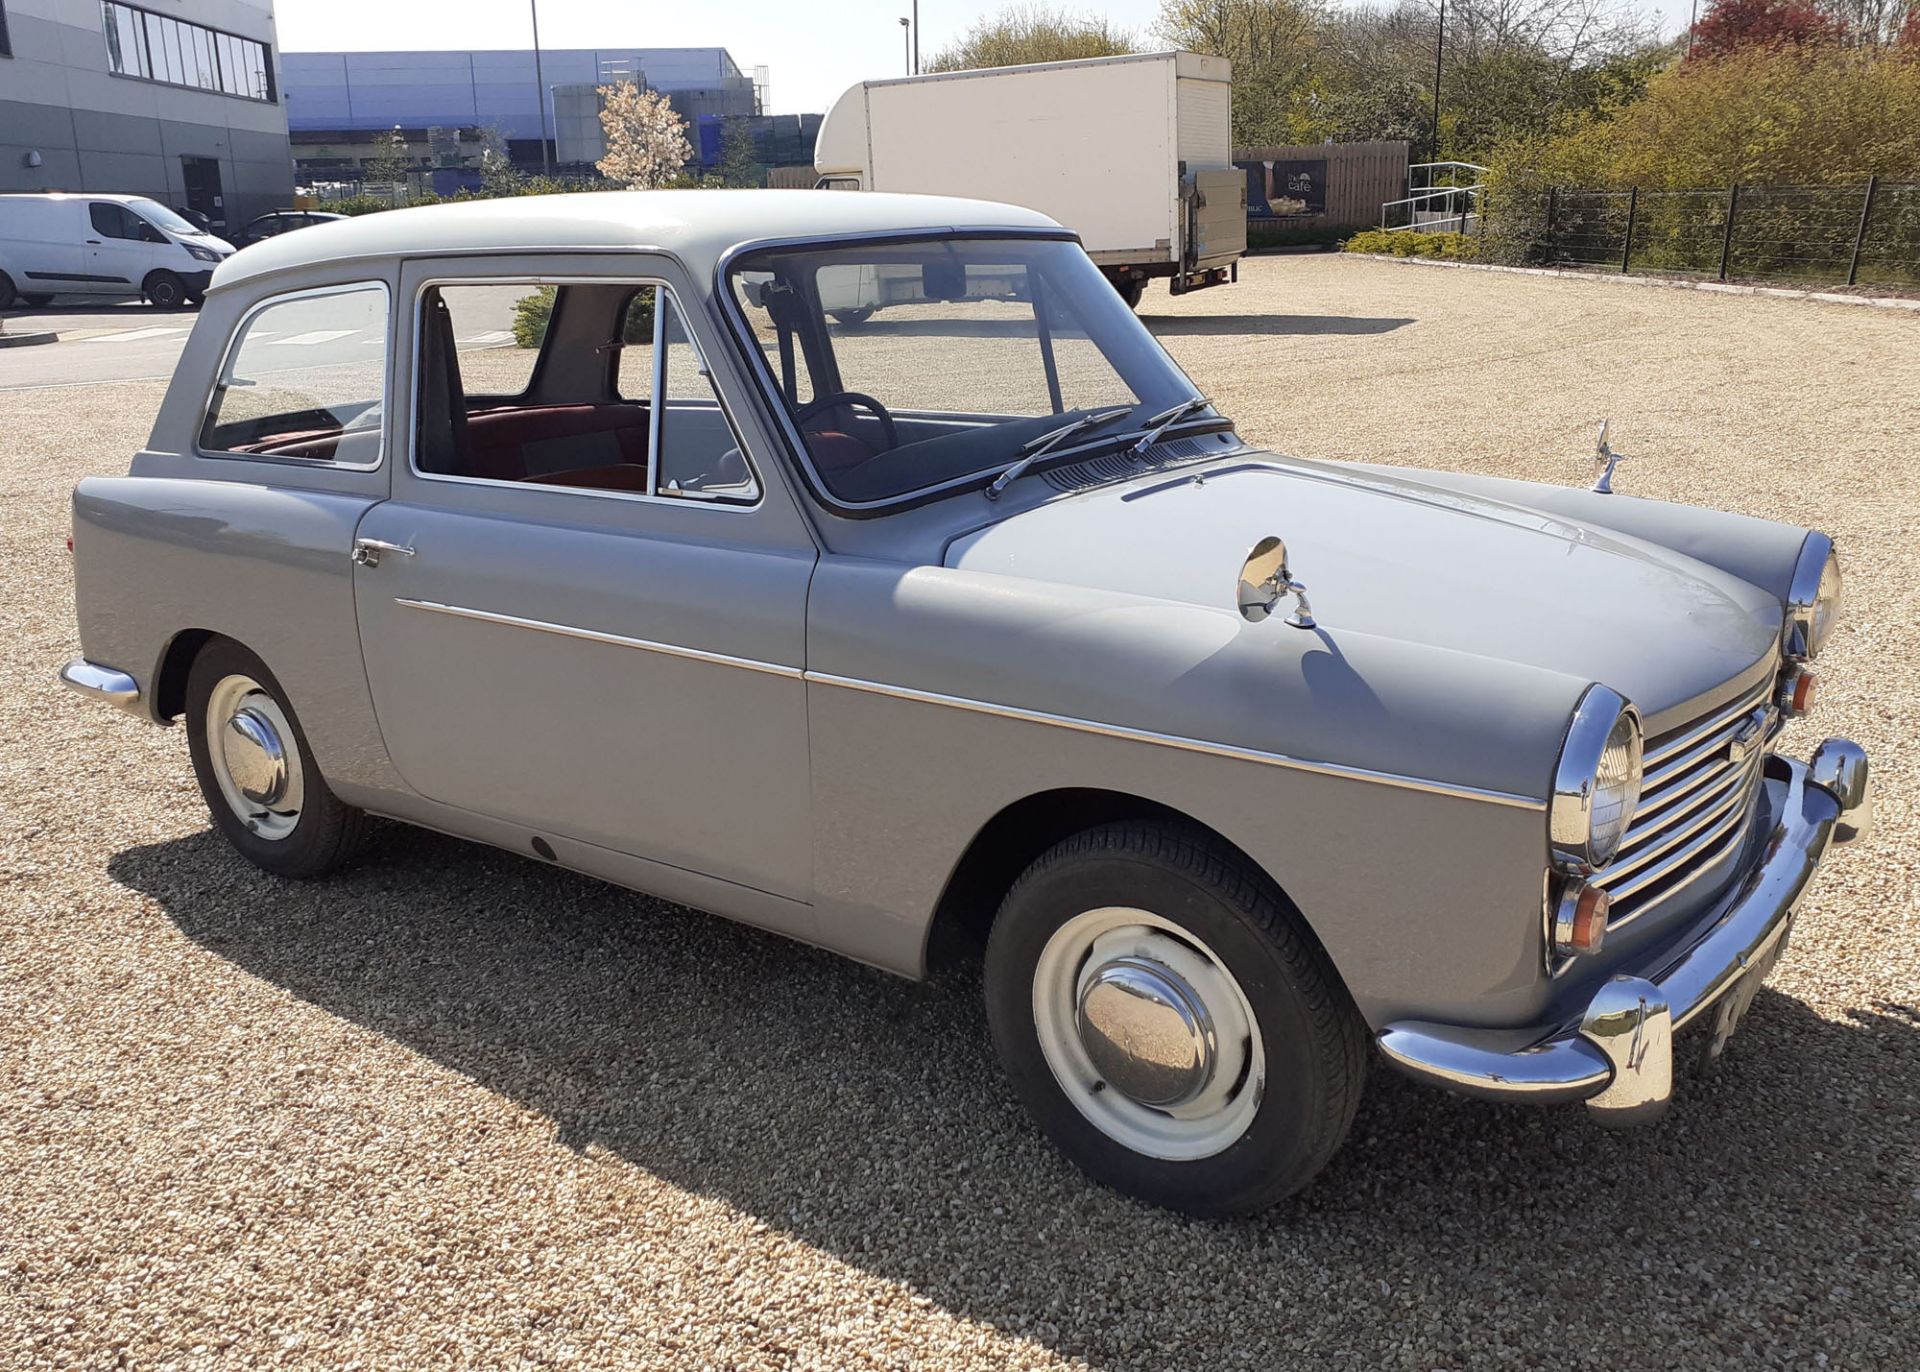 570 BLX (1962) Austin A40 Farina two door saloon in grey and white, Tax class as an Historic - Image 8 of 20